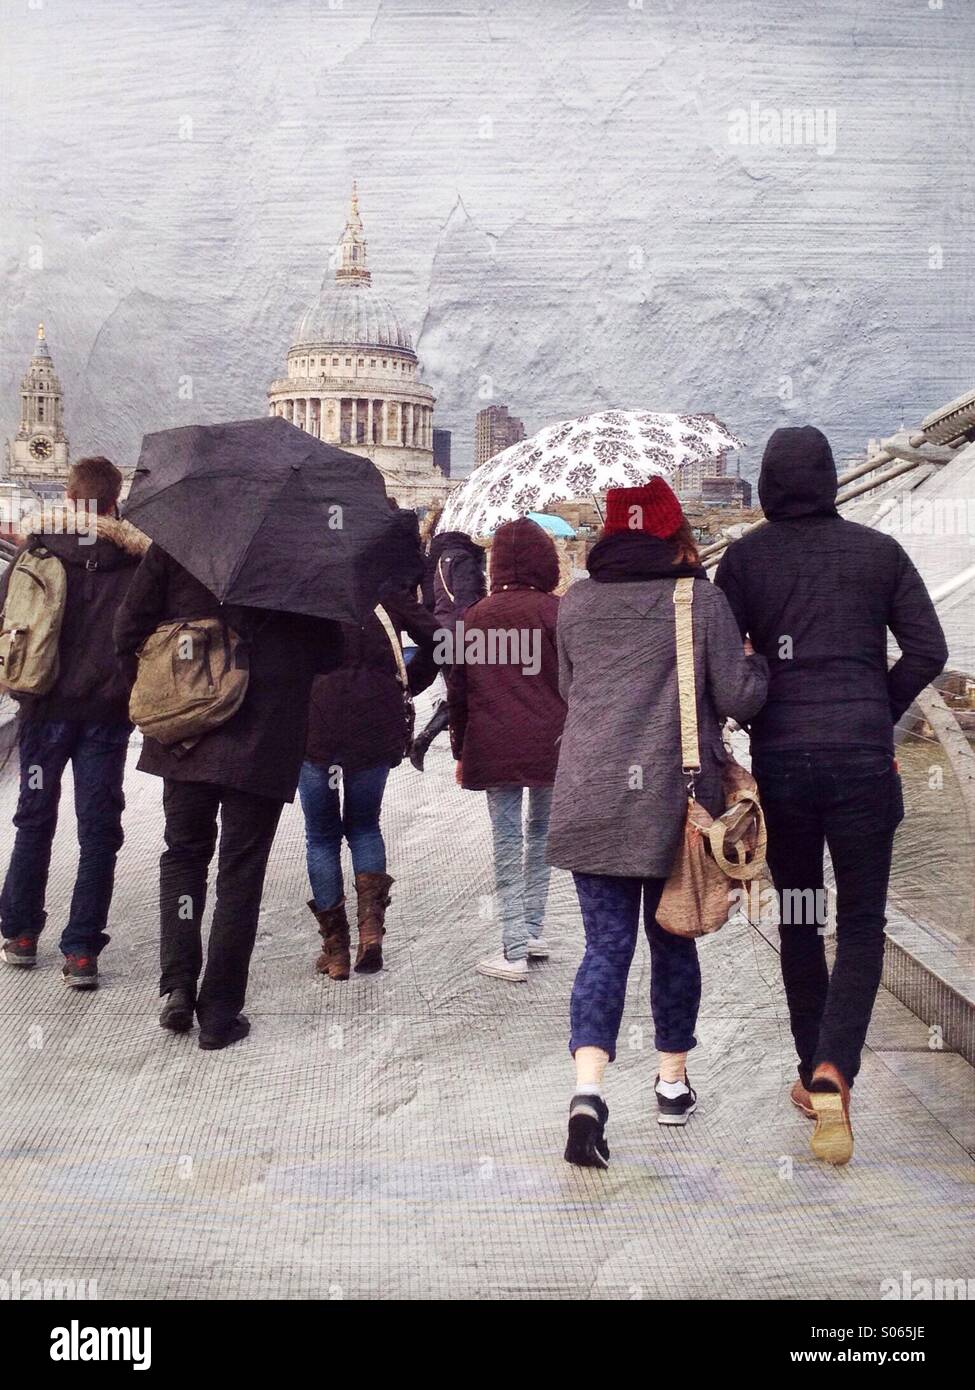 A rainy day in London Town - tourists cross the Millennium Bridge towards St Paul's Cathedral with umbrellas to keep off the English weather Stock Photo